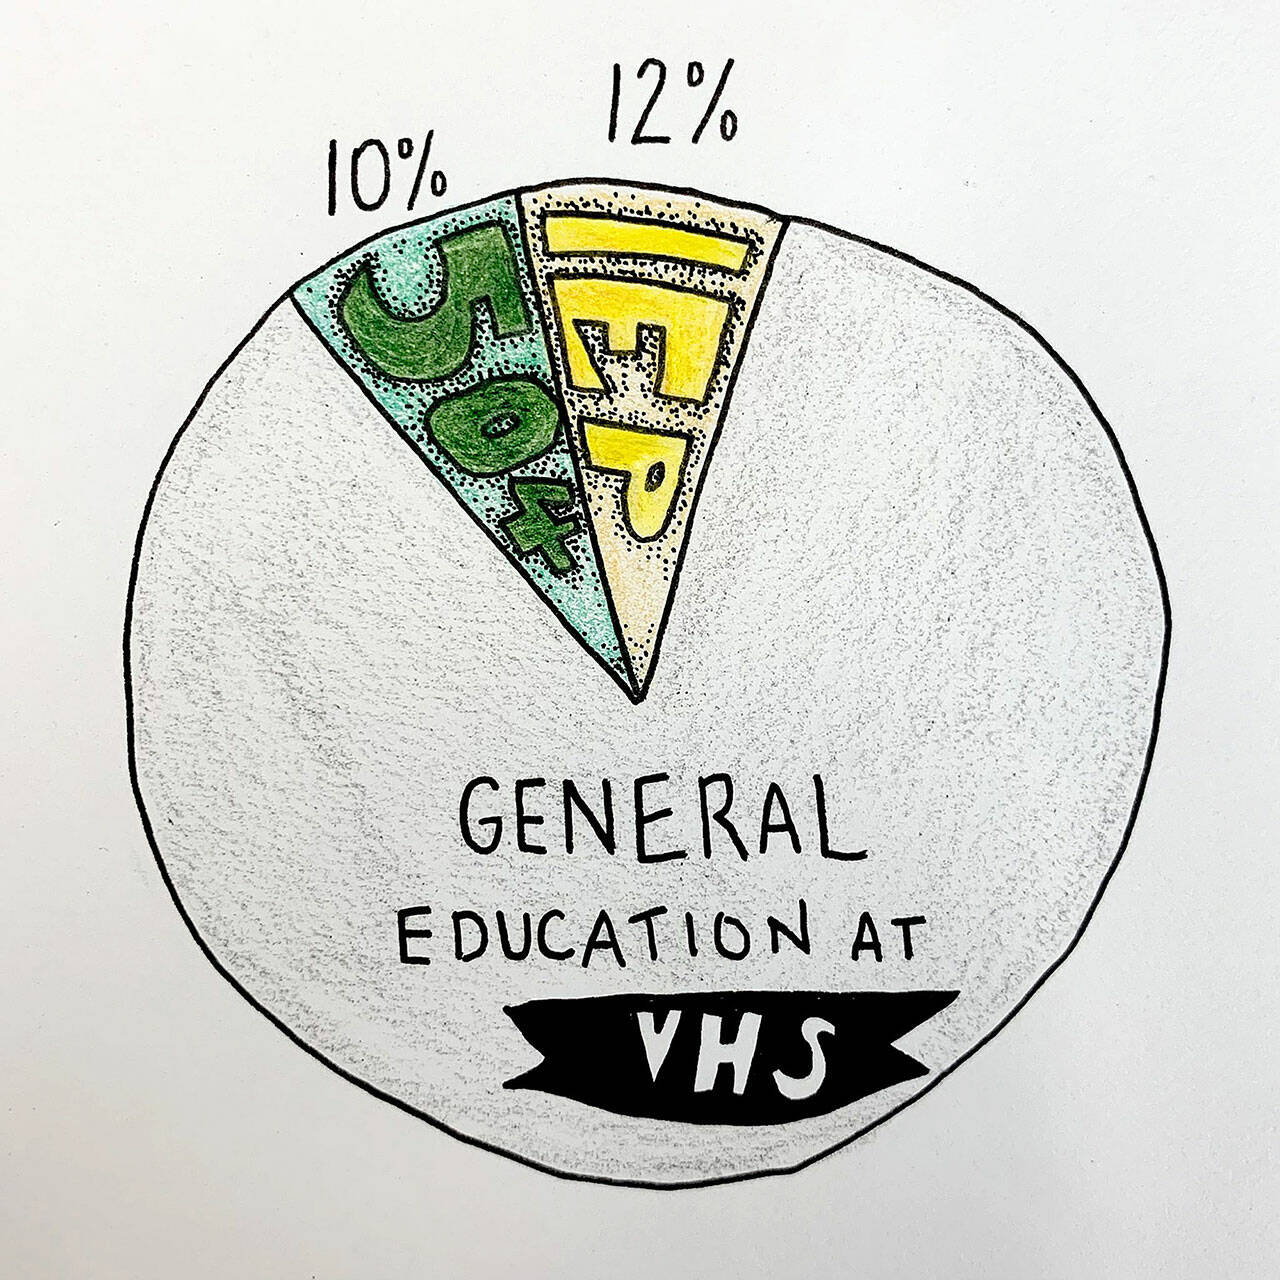 (Savannah Butcher Graphic) Students served by 504 plans and Individualized Education Plans (IEPs) make up 22% of the student body at VHS. The other 78% do not have written accommodations.